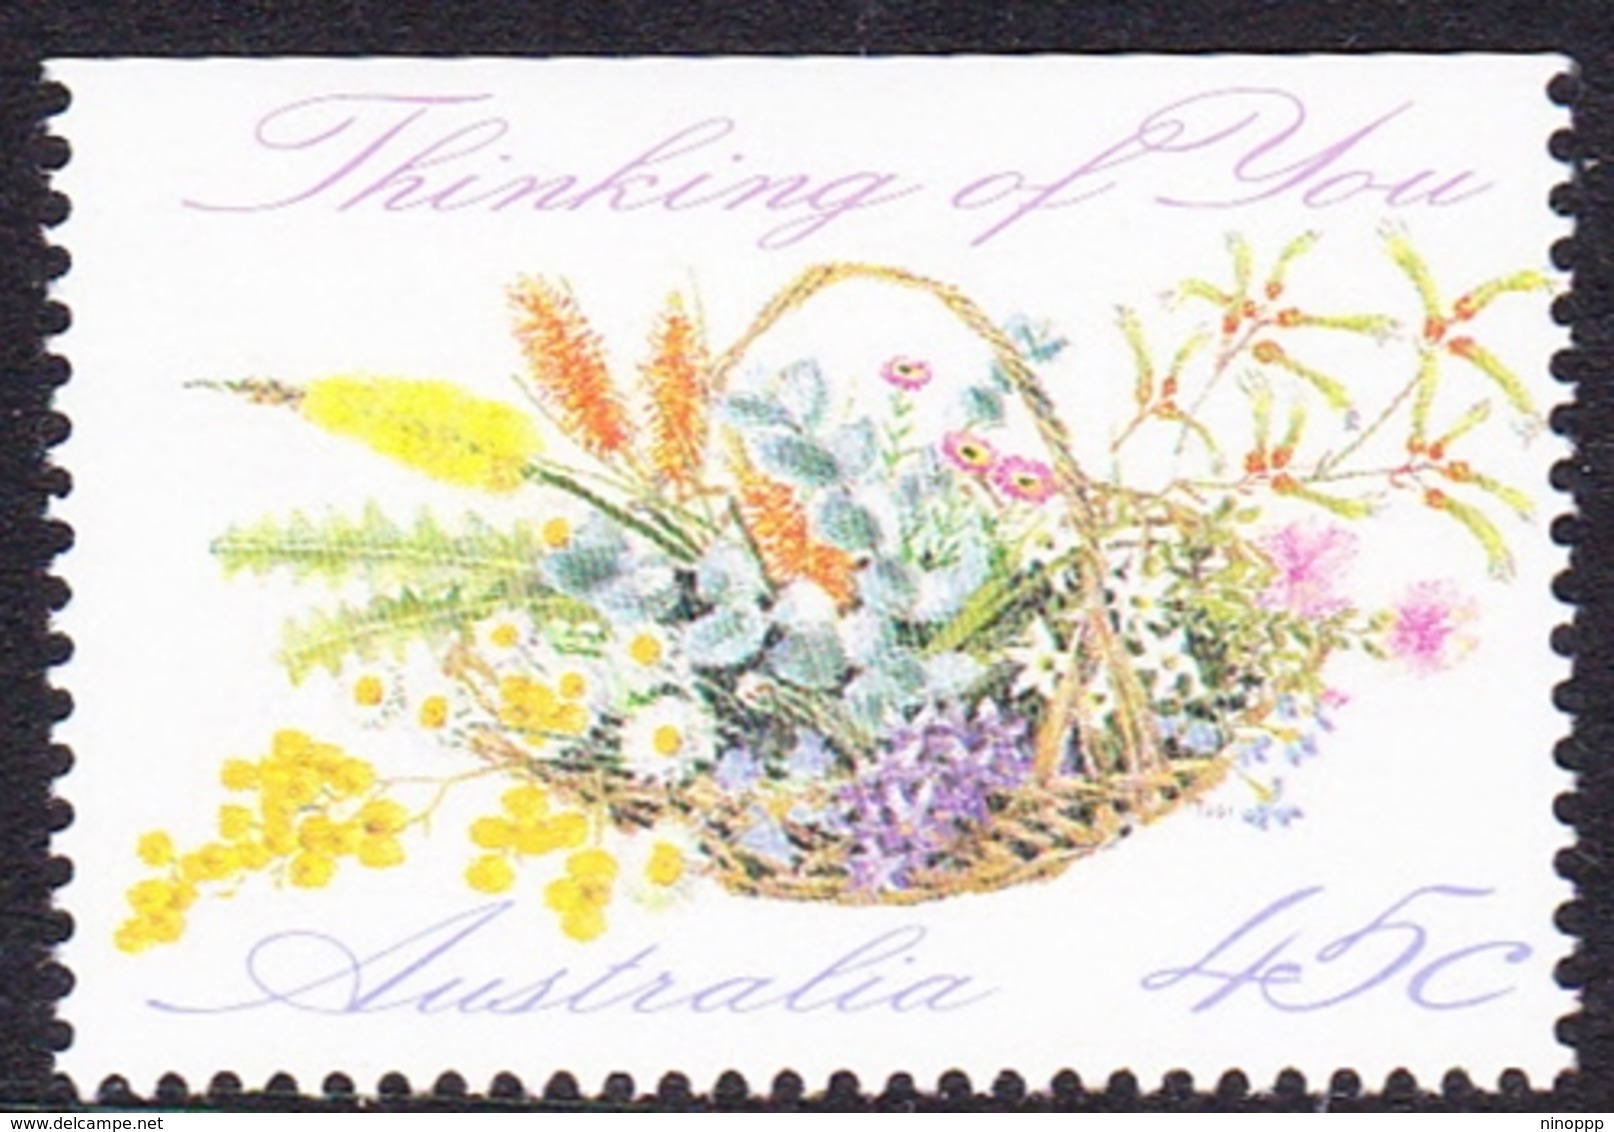 Australia ASC 1328 1992 Thinking Of You, Booklet Stamp, Mint Never Hinged - Mint Stamps